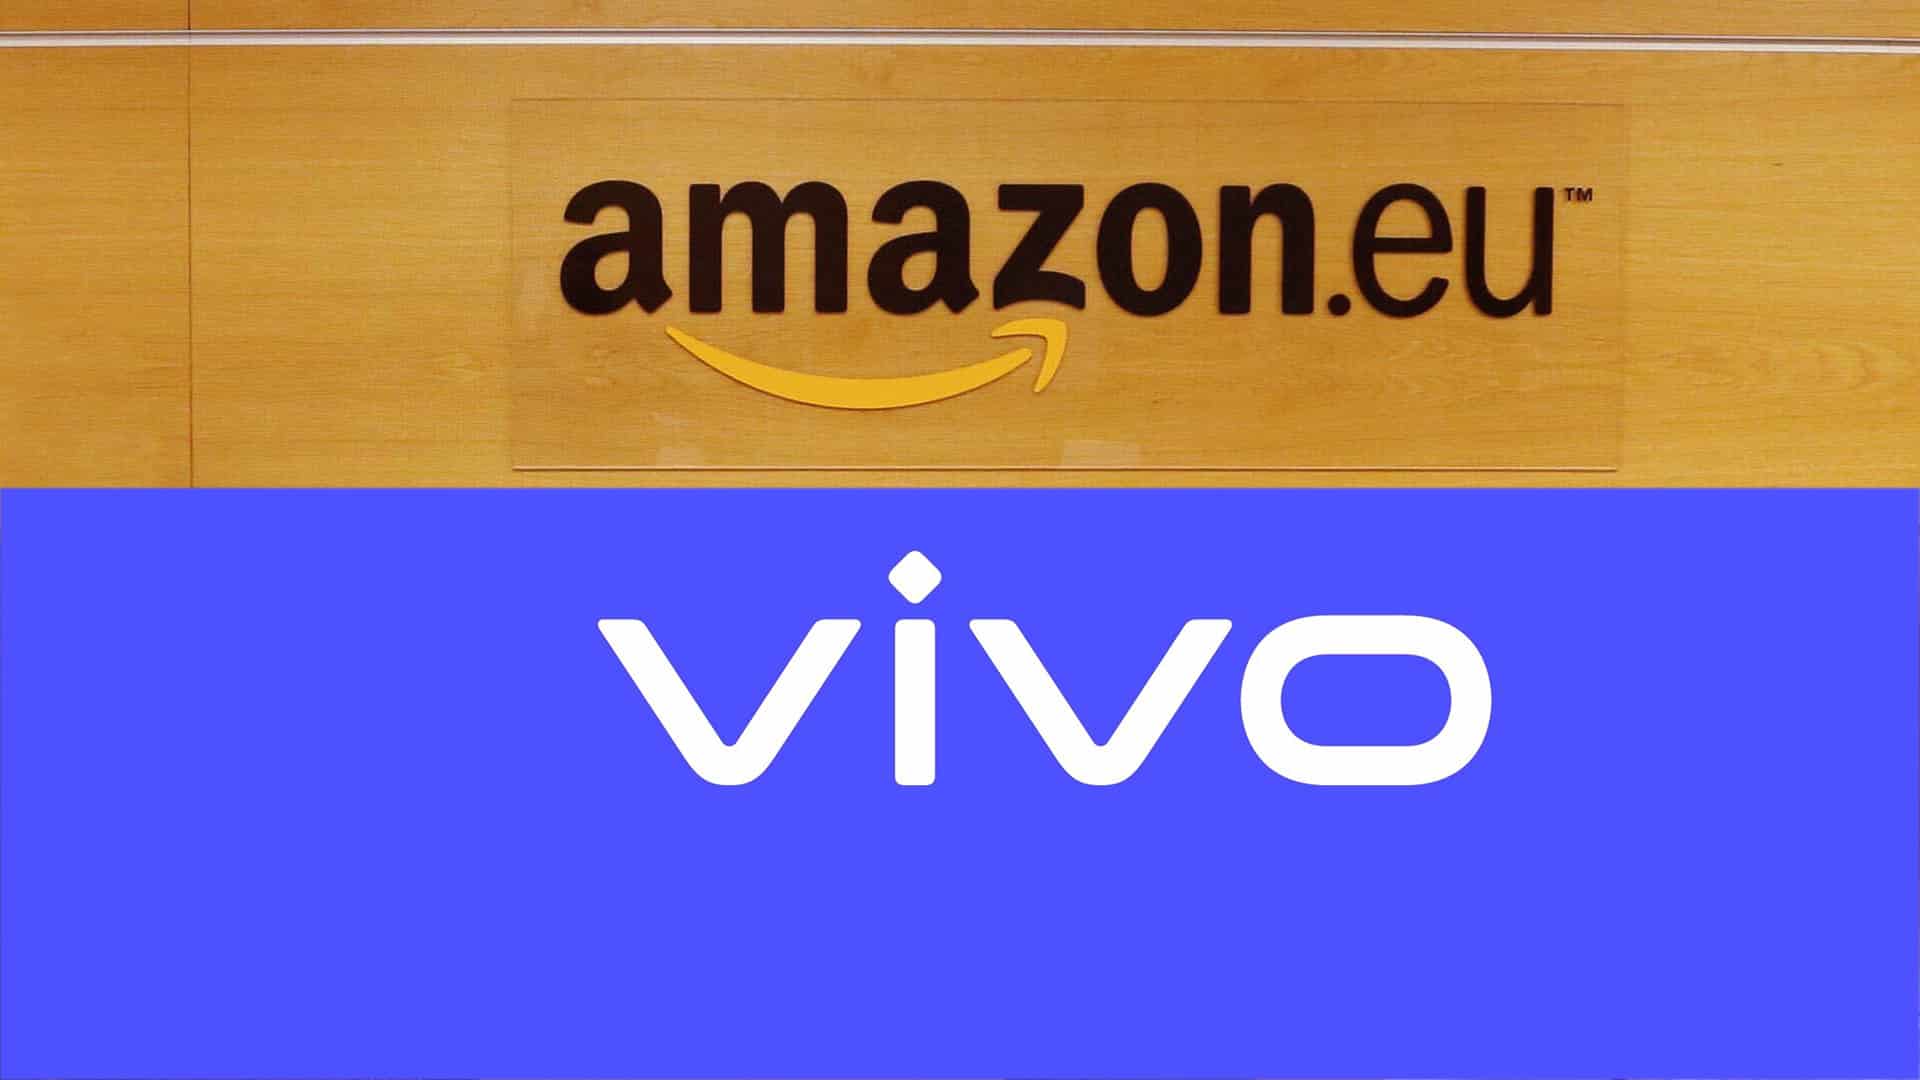 Amazon Europe, Vivo commits Rs 28 crore for India's fight against Covid-19